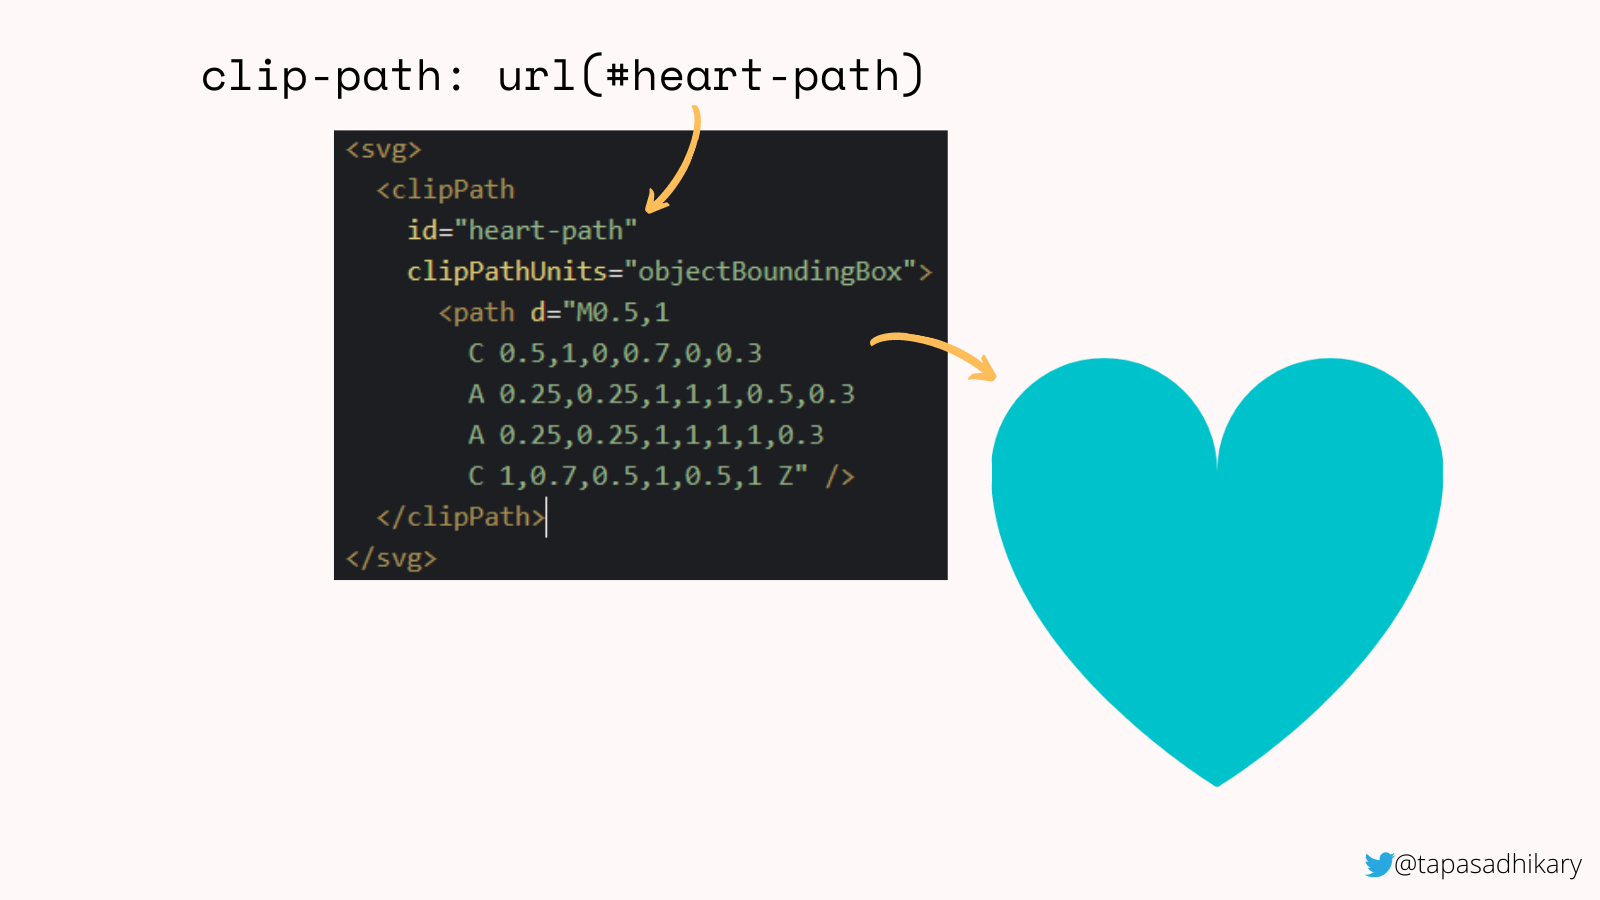 Showing the SVG code for a heart-shaped path and the actual heart next to it in blue.